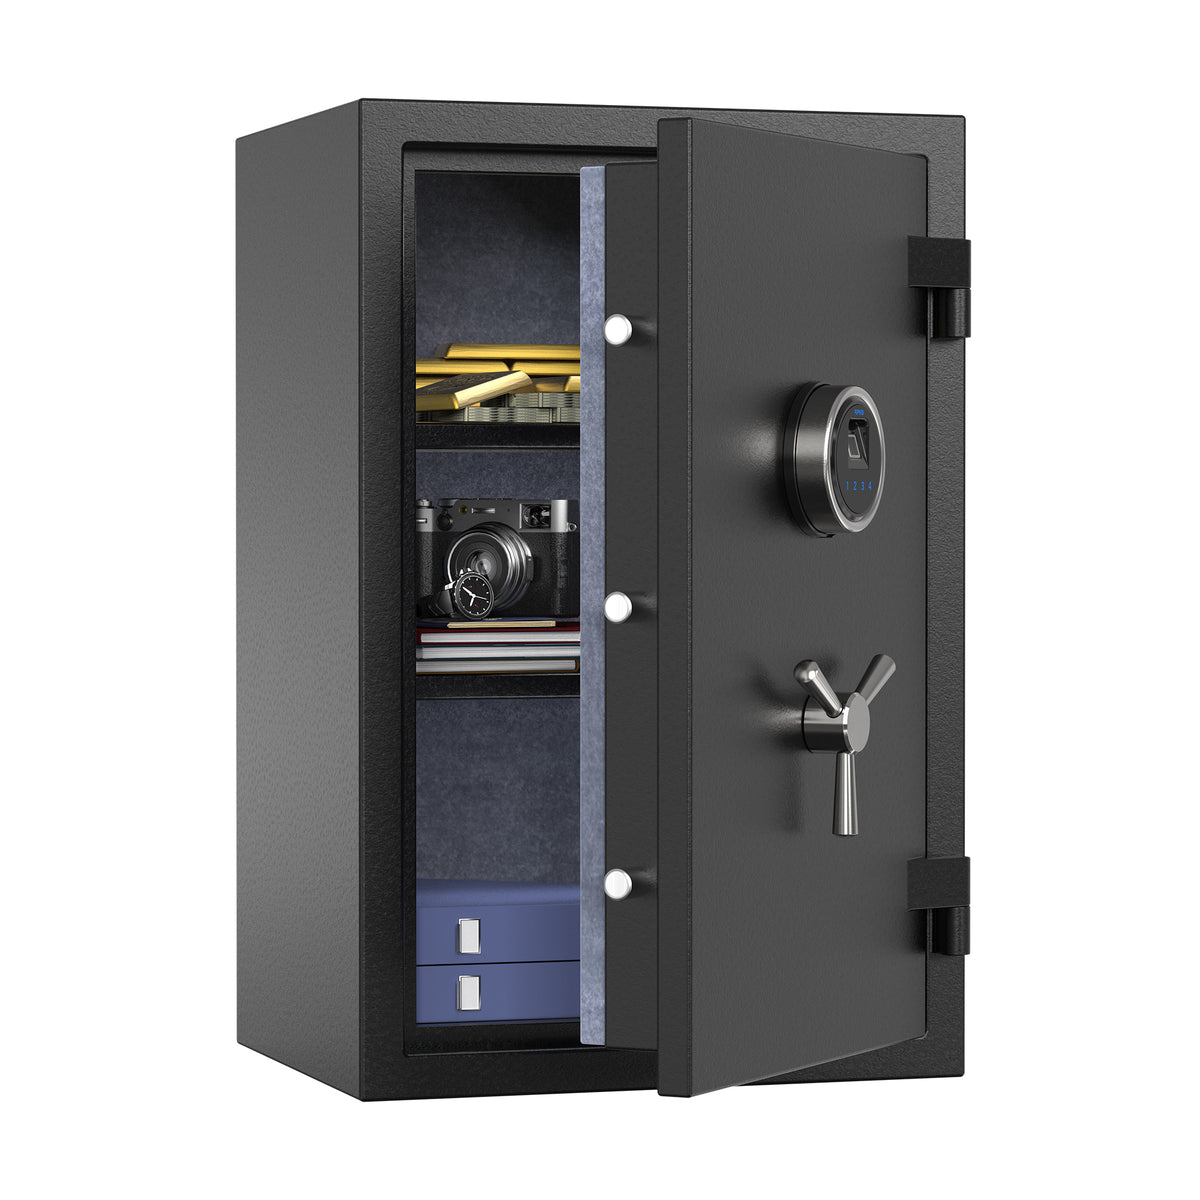 RPNB RPFS66 Large Biometric Fireproof Safe with Touch Screen Keypad Door Open